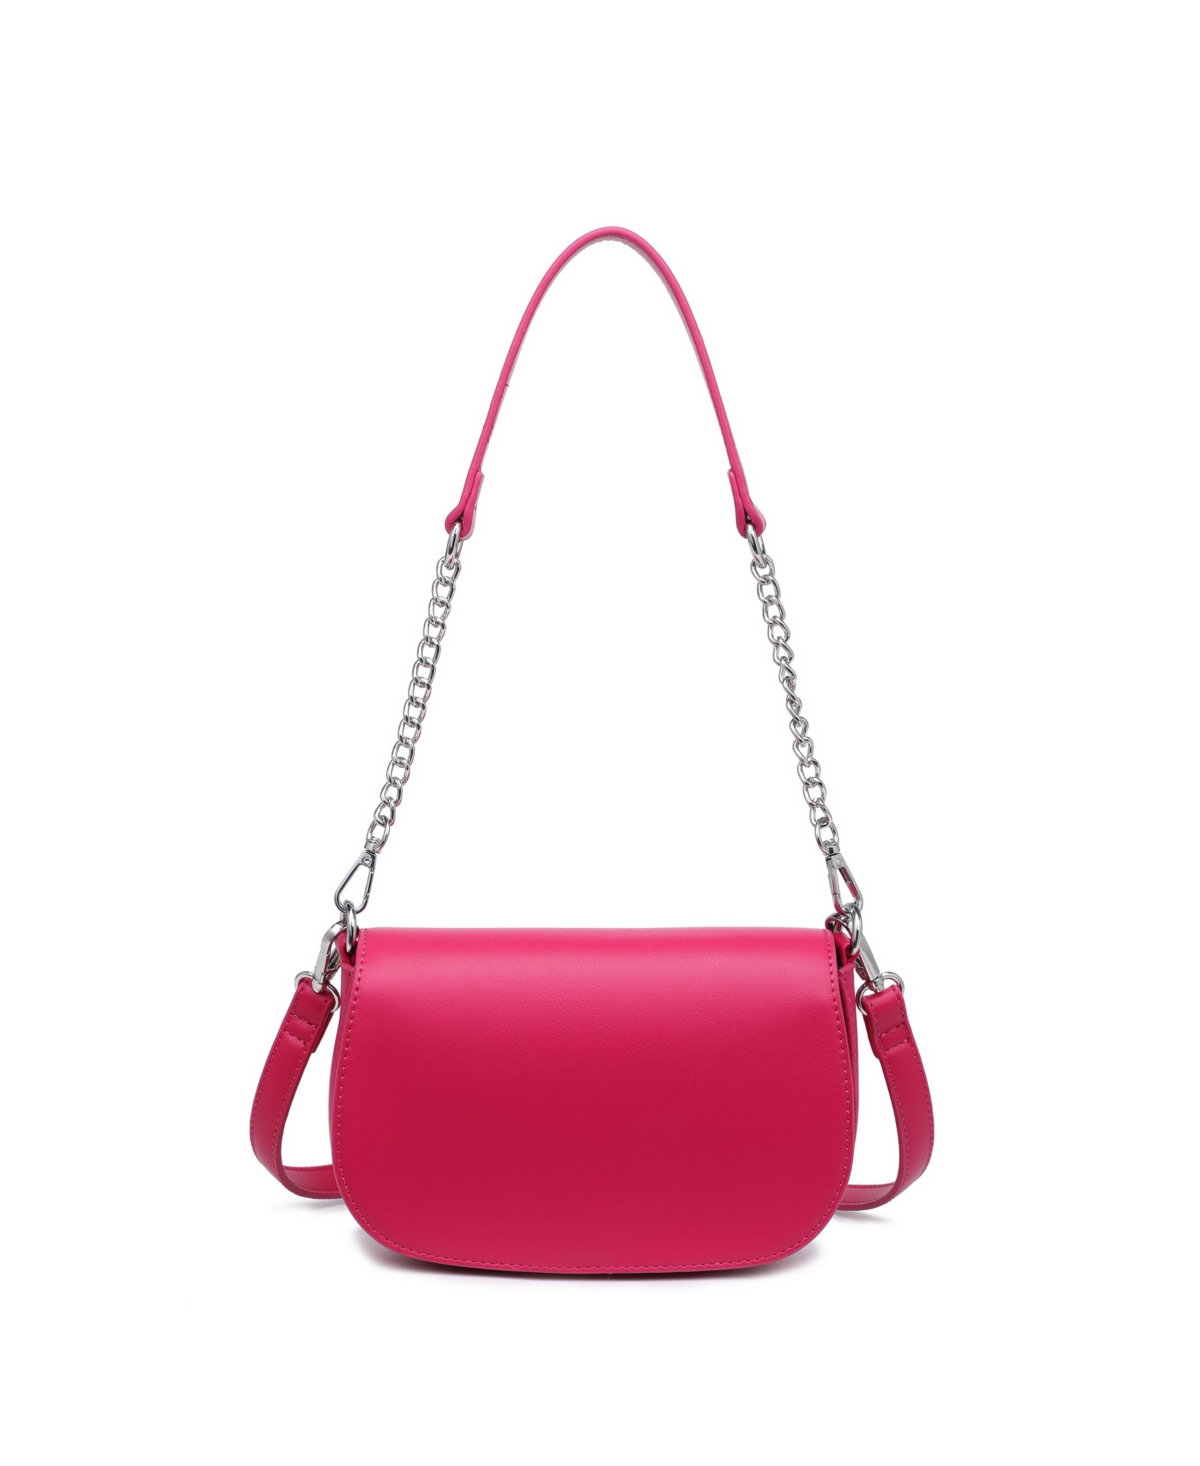 Urban Expressions Tracie Shoulder Bag In Pink